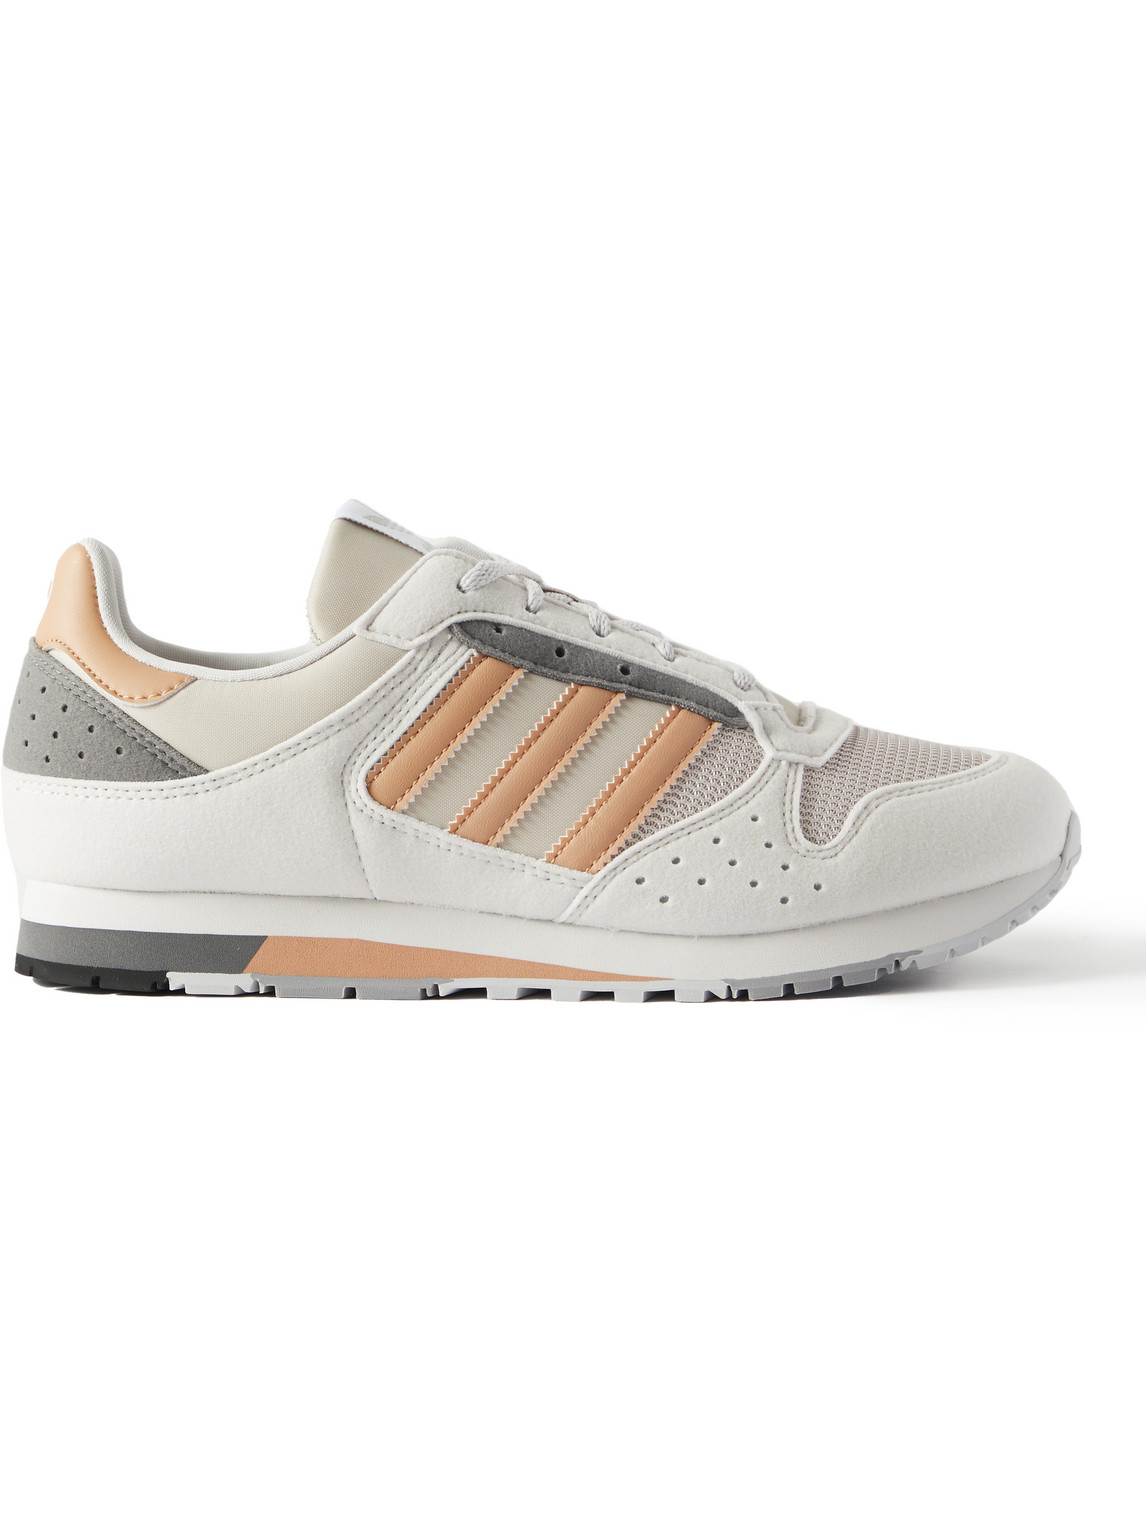 Adidas Consortium Spezial Zx 620 Mesh-trimmed Faux Suede Sneakers In White